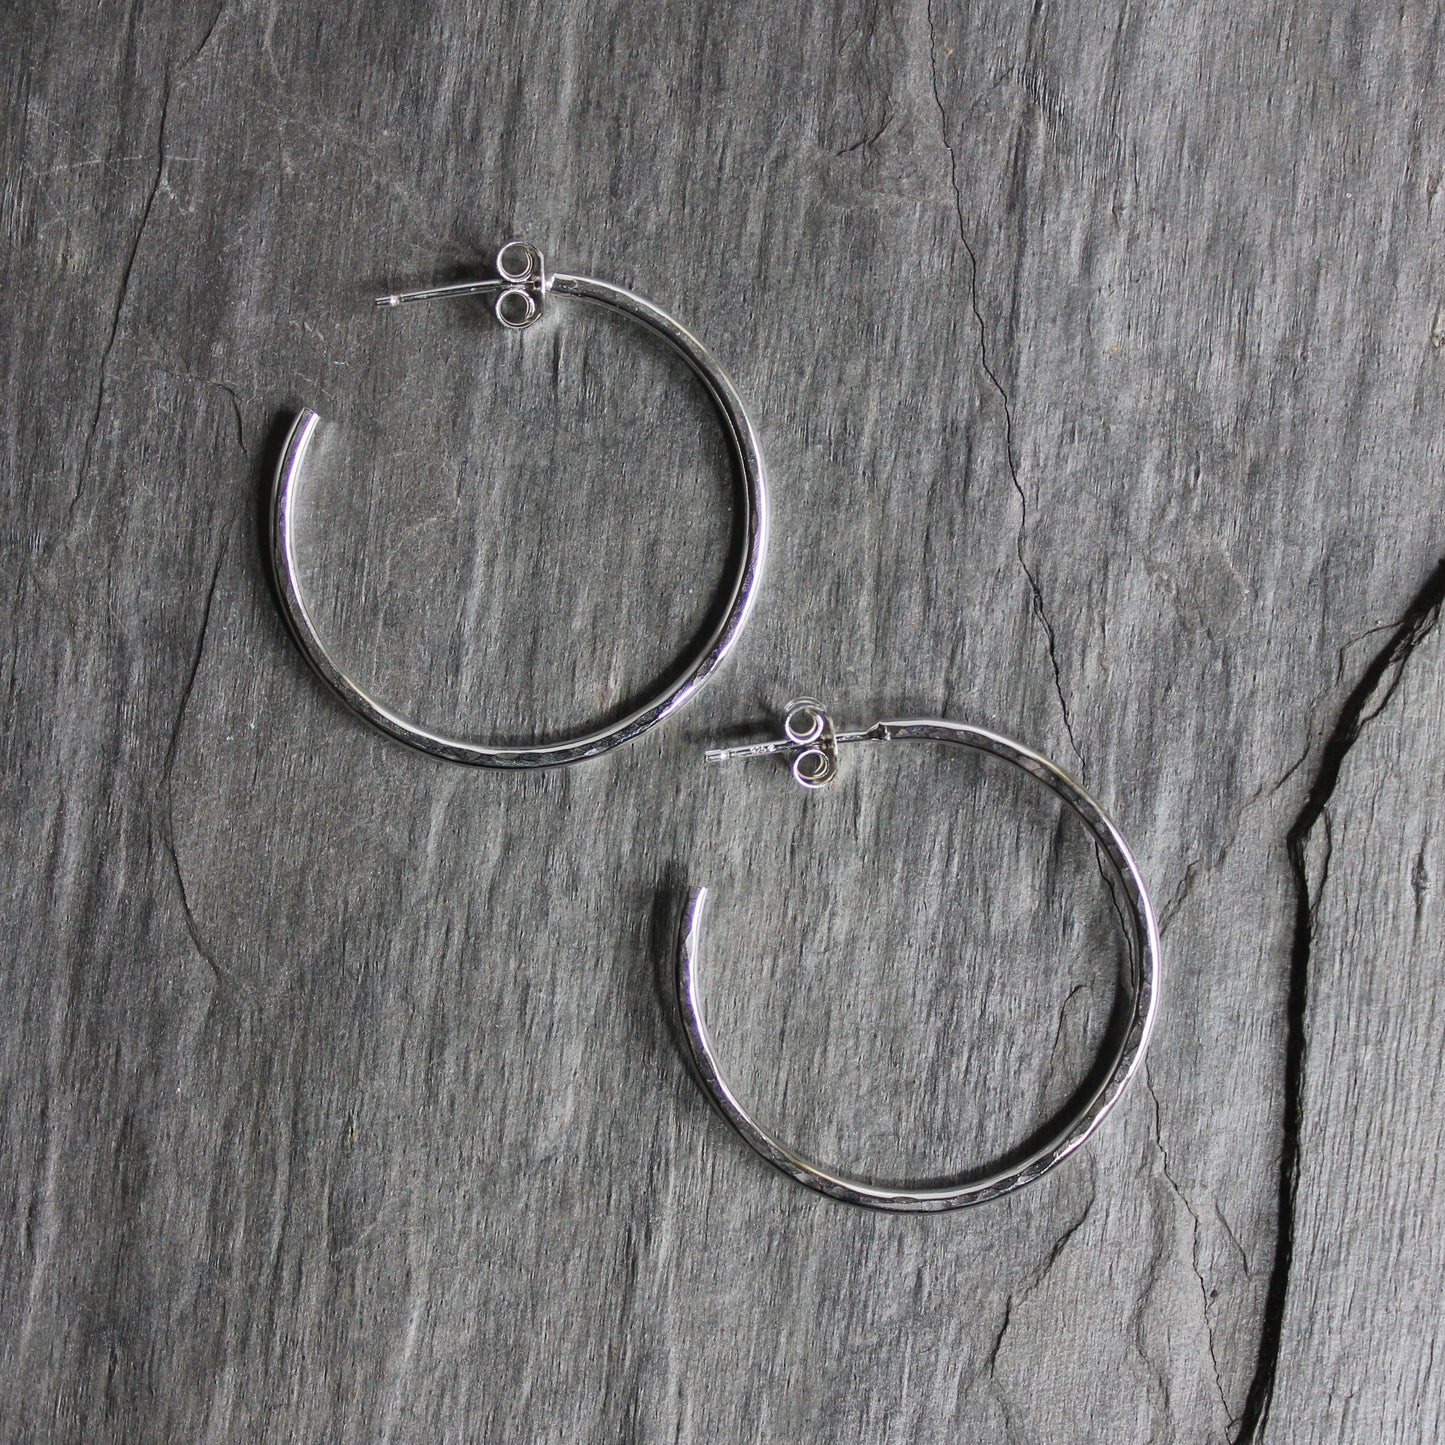 Handmade hammered sterling silver classic hoop earrings on sterling silver posts with earring nuts that are approximately 1 1/4 inch diameter. 